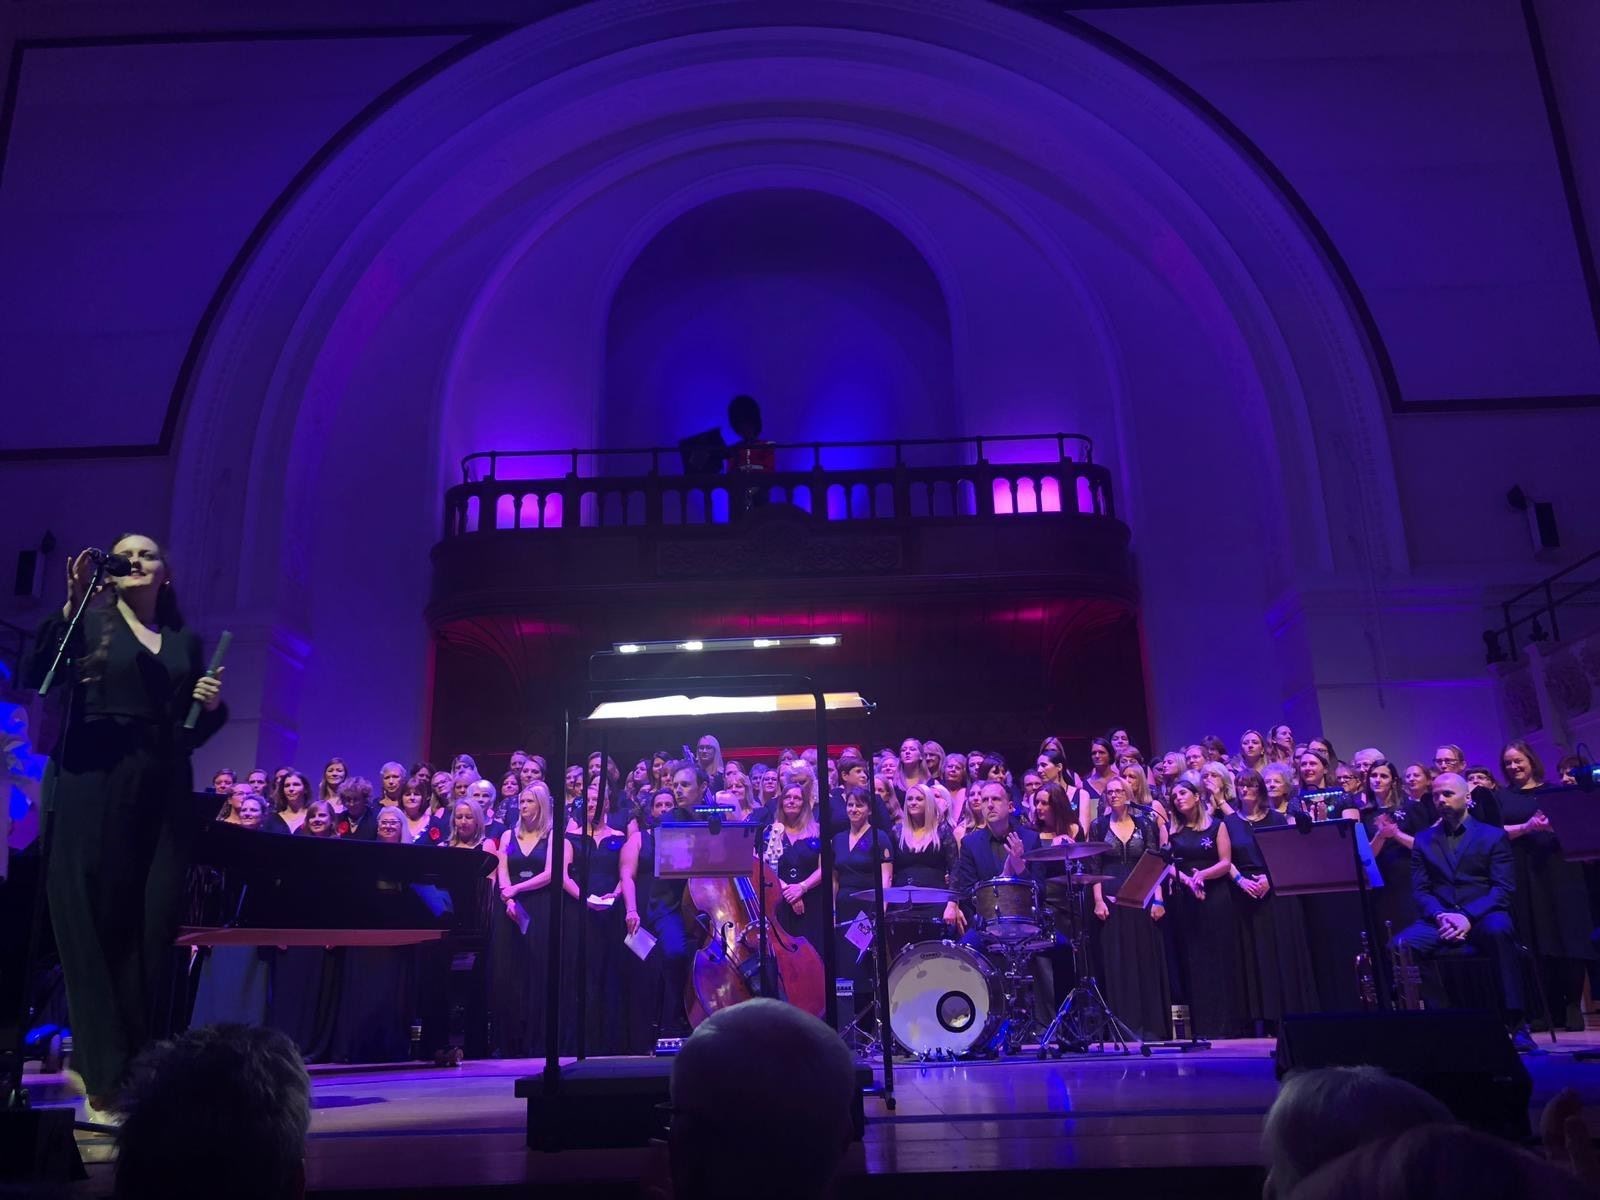 The assembled Military Wives Choirs in harmony at London's Cadogan Hall.